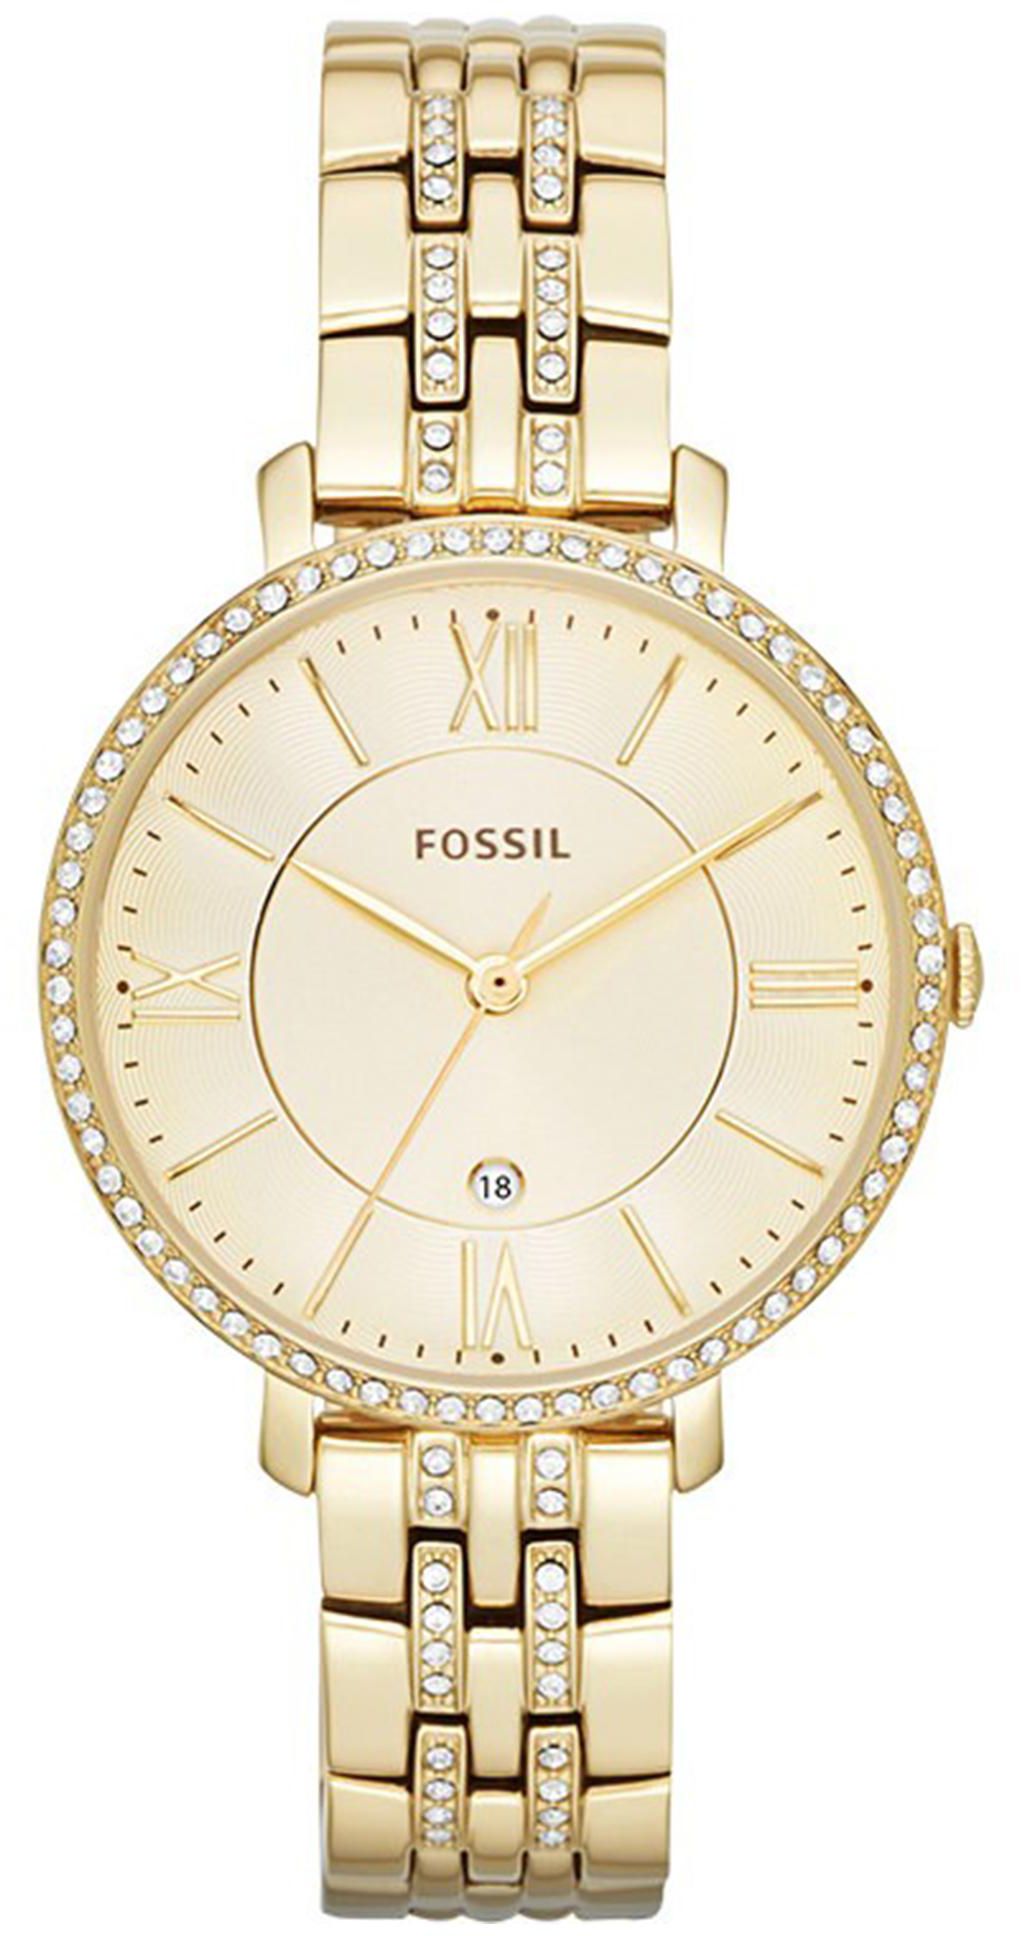 Fossil Women's Jacqueline Gold Dial Gold PVD Stainless Quartz Watch